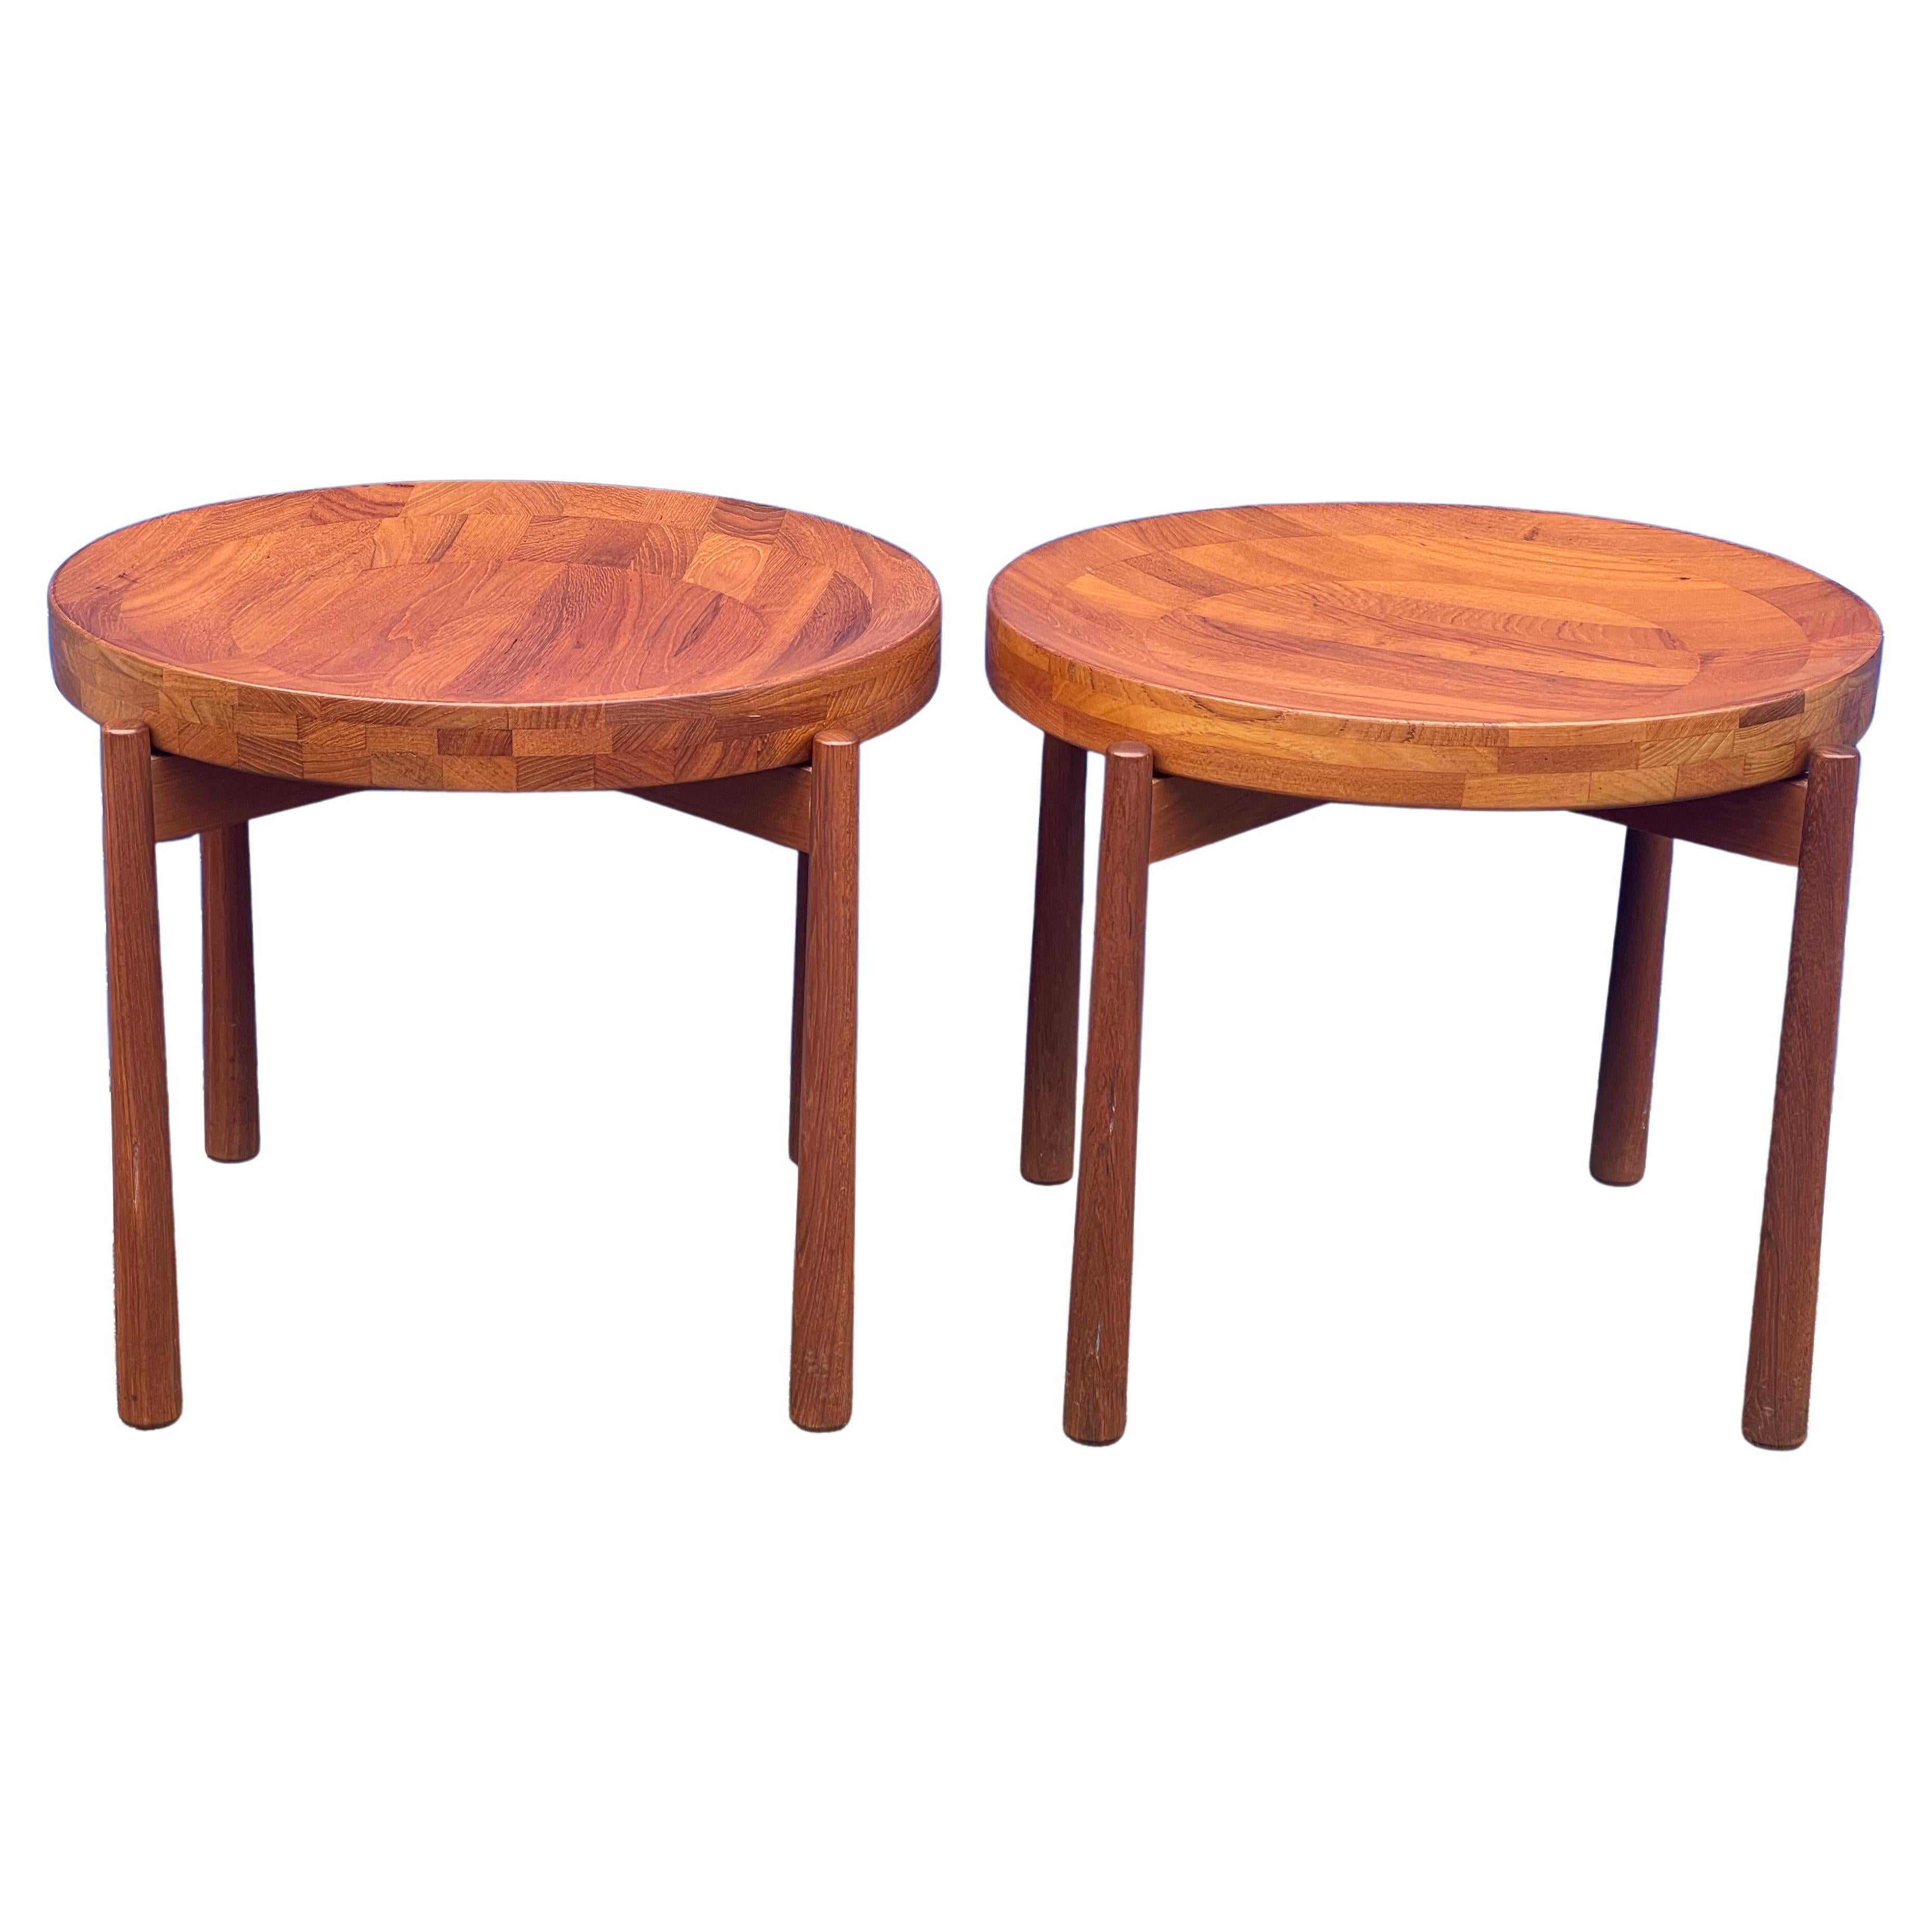 Gorgeous pair of staved teak tray side tables attributed to Jens Harald Quistgaard for DUX of Sweden, circa 1960s. The tables have a removable concaved top that can be used as a tray or fruit bowl. The top can be turned over to the flat side to